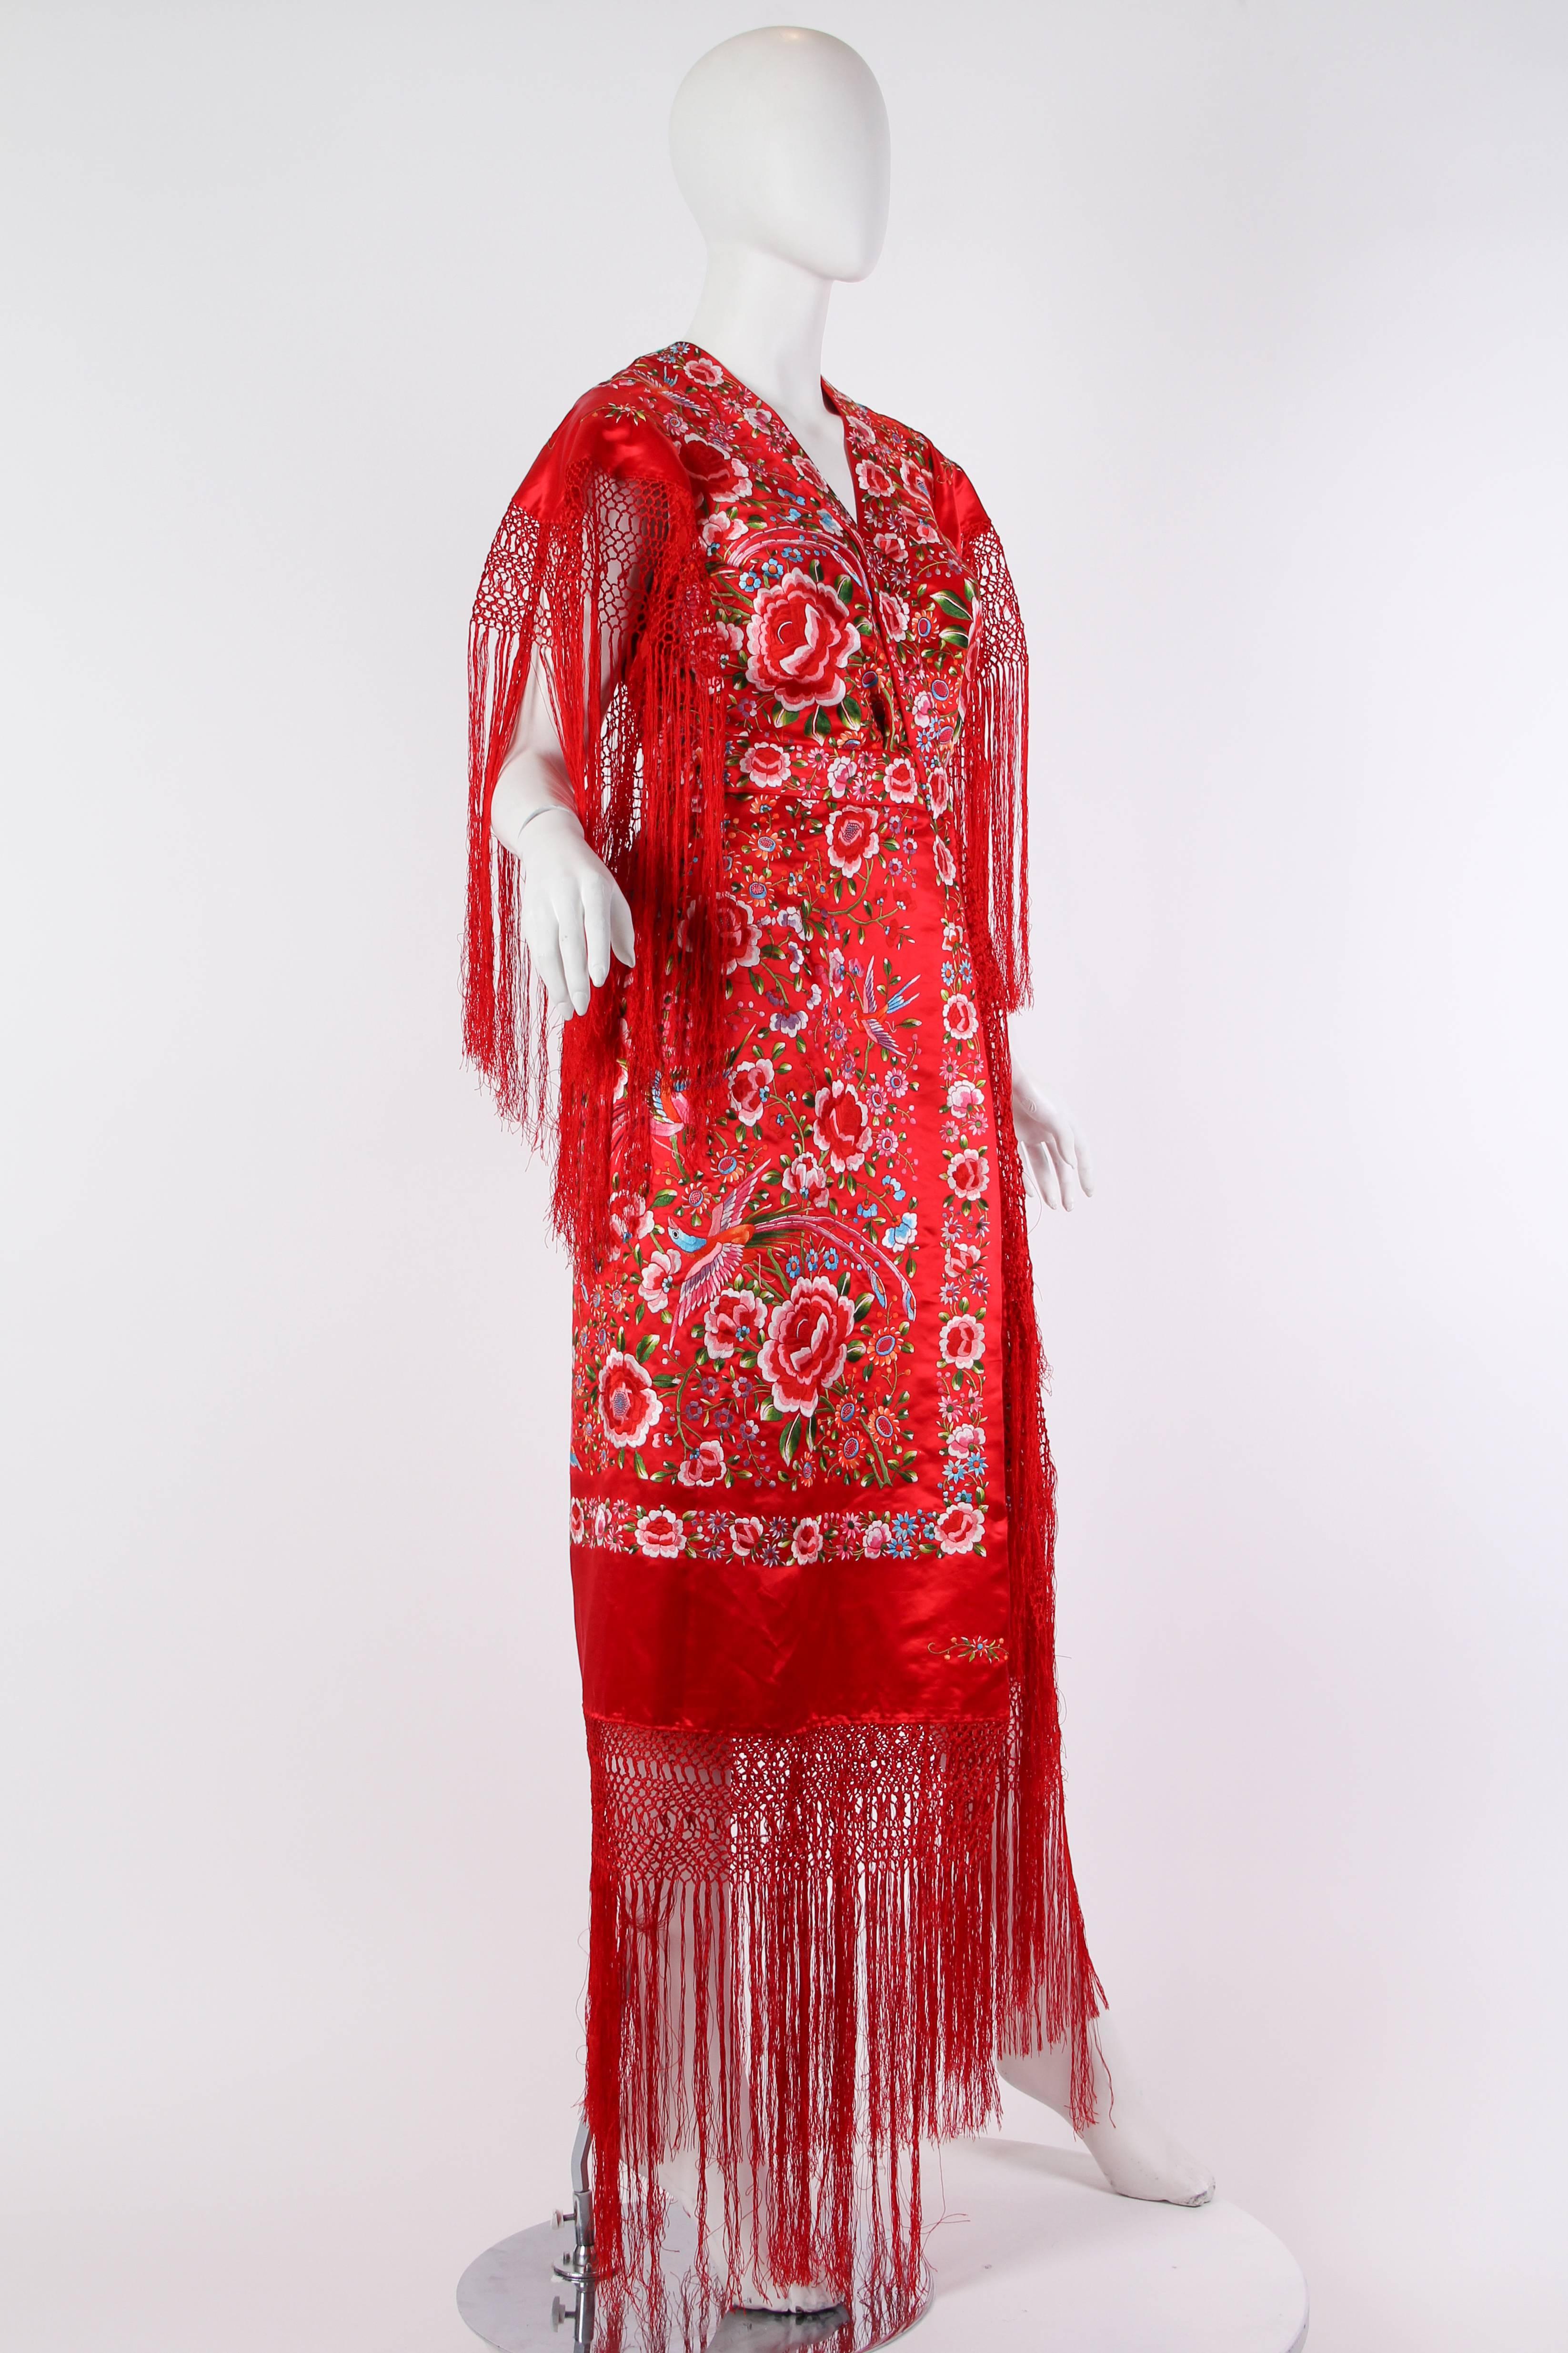 Red Phenomenal Hand-Embroidered Chinese Shawl Dress with Fringe